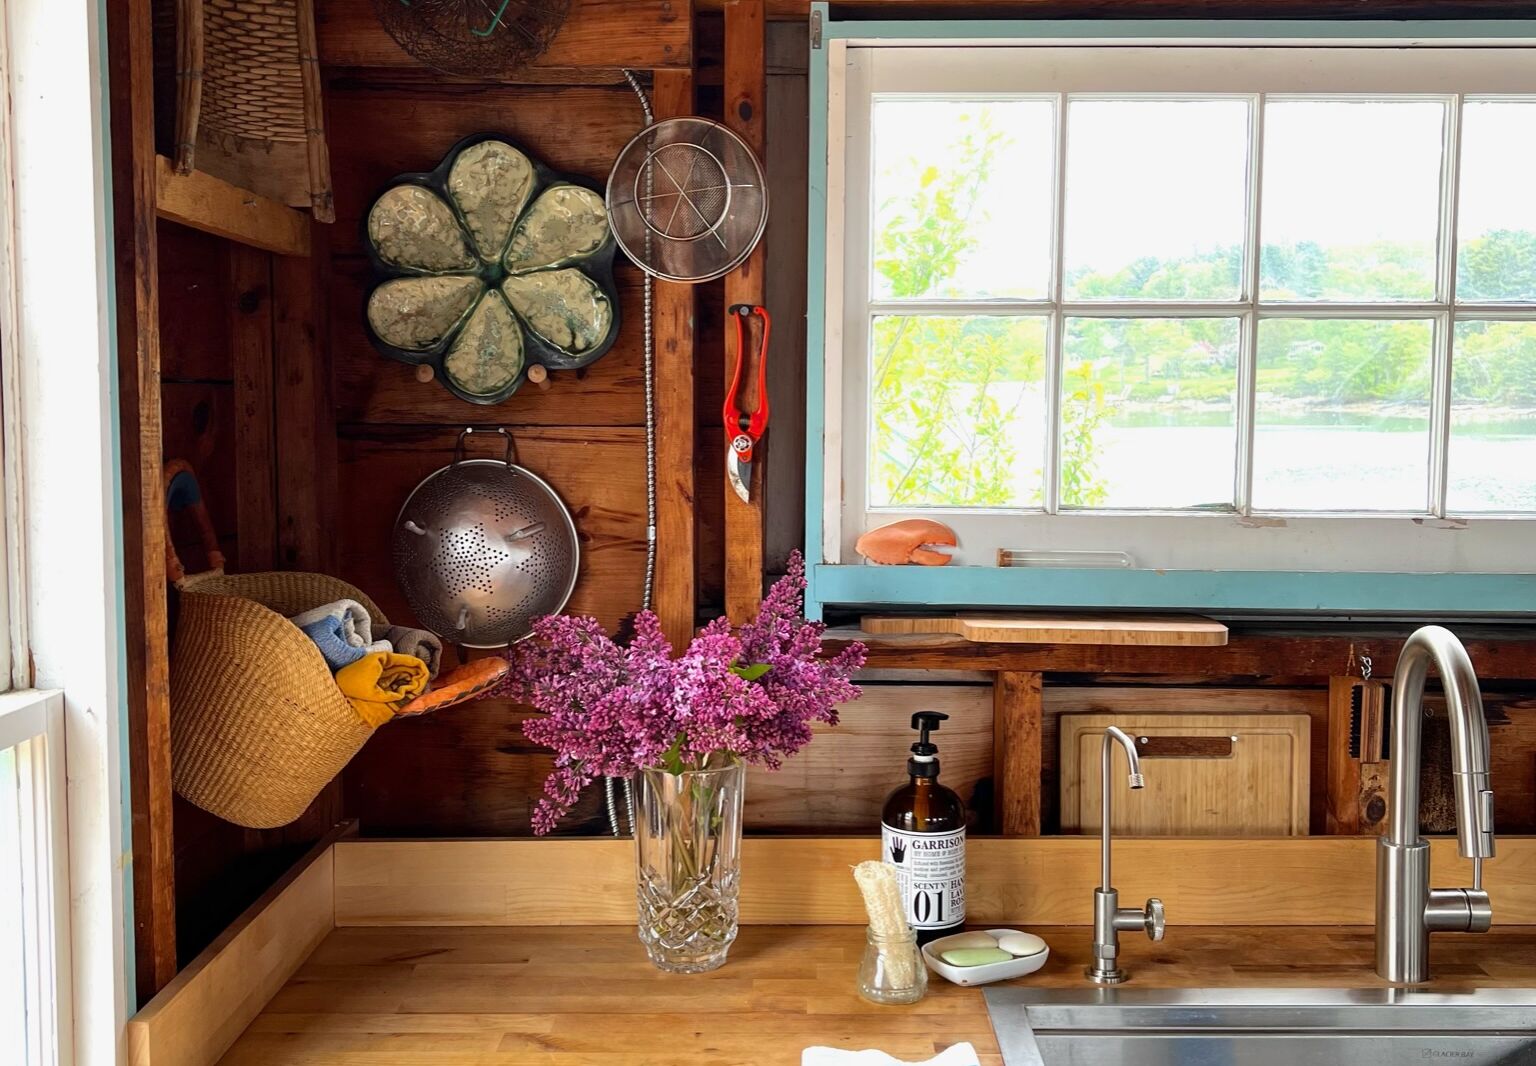 Lili and Blake's Summer Kitchen in Harpswell, ME